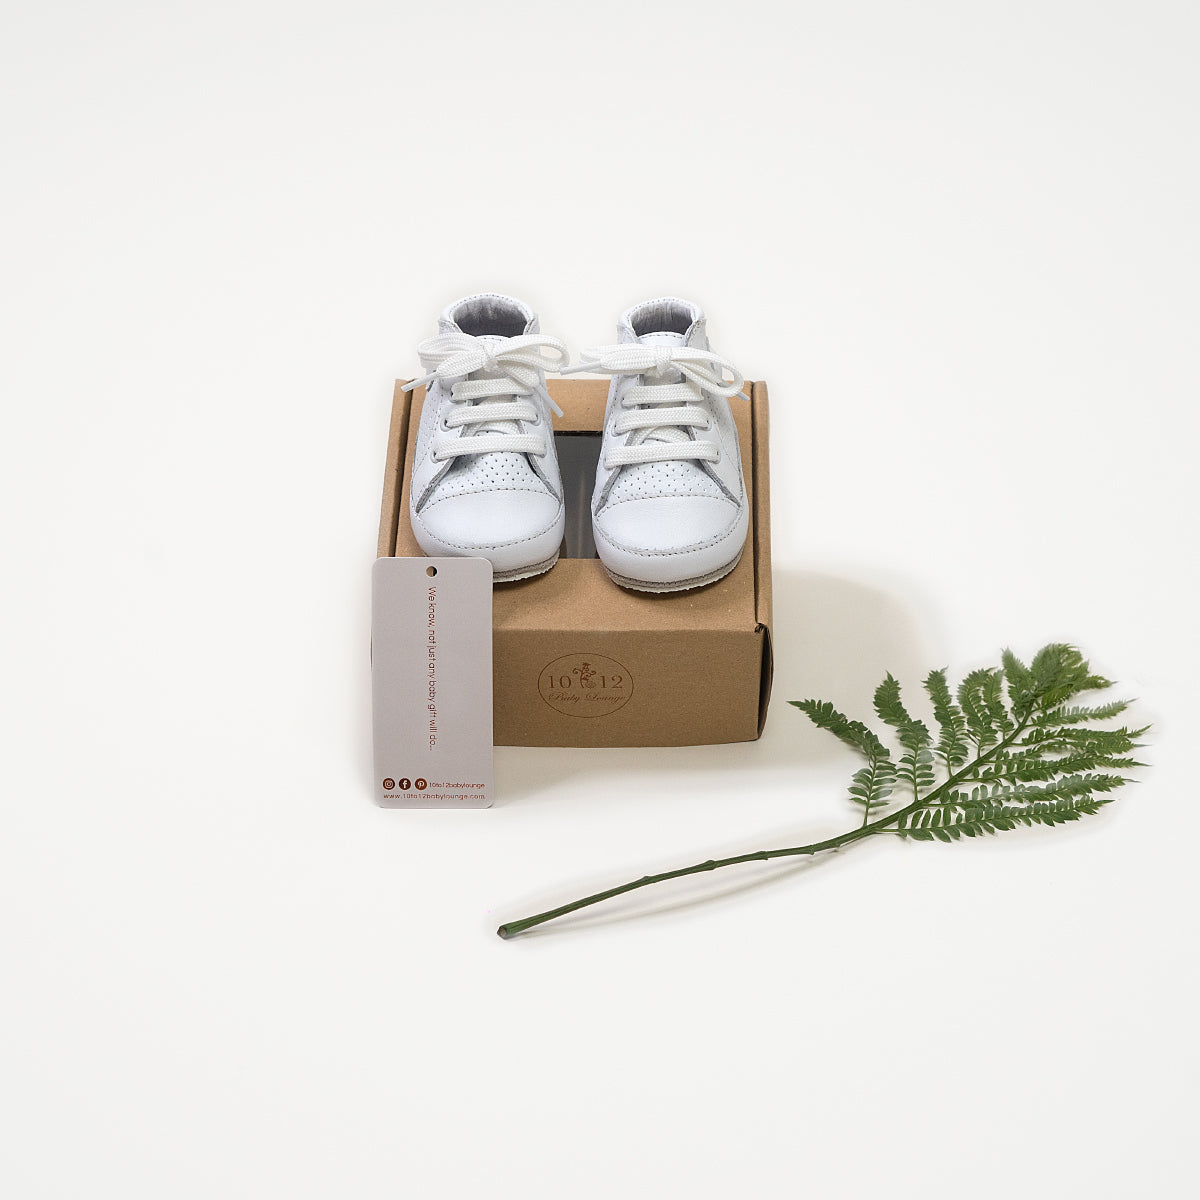 Baby Baller Sneakers - White - Product Shot with the Box 1